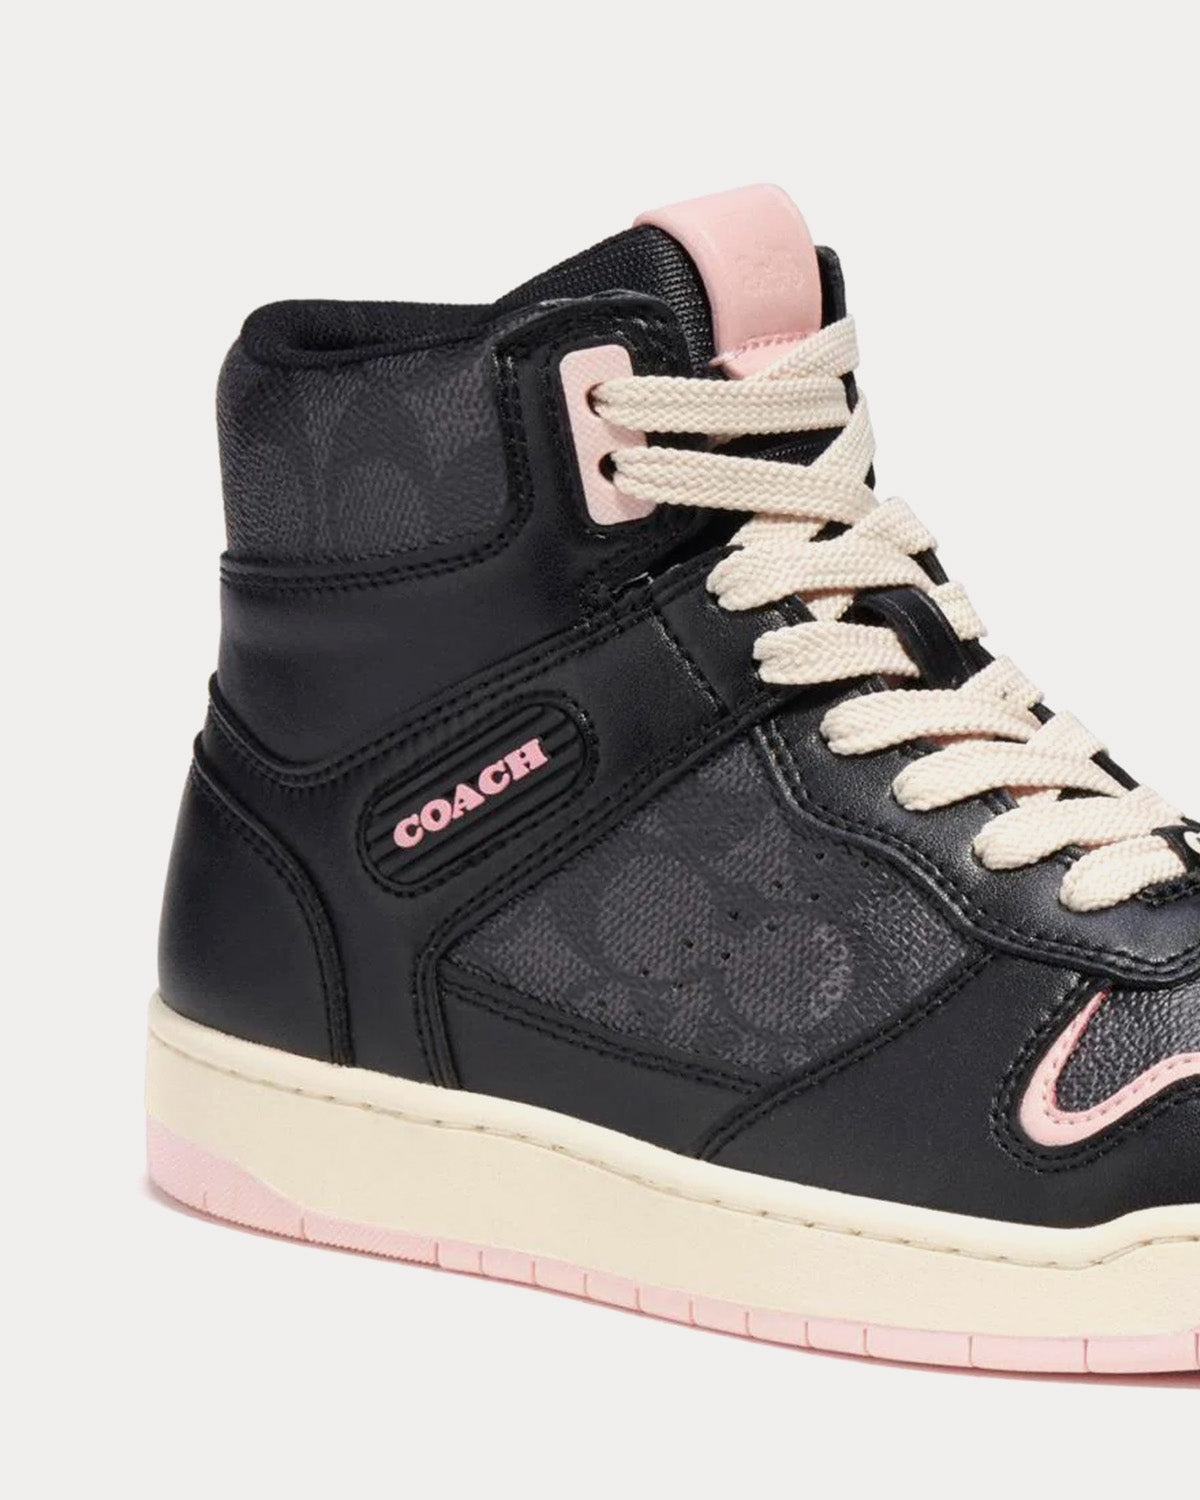 Coach - Retro Signature Canvas & Leather Black High Top Sneakers